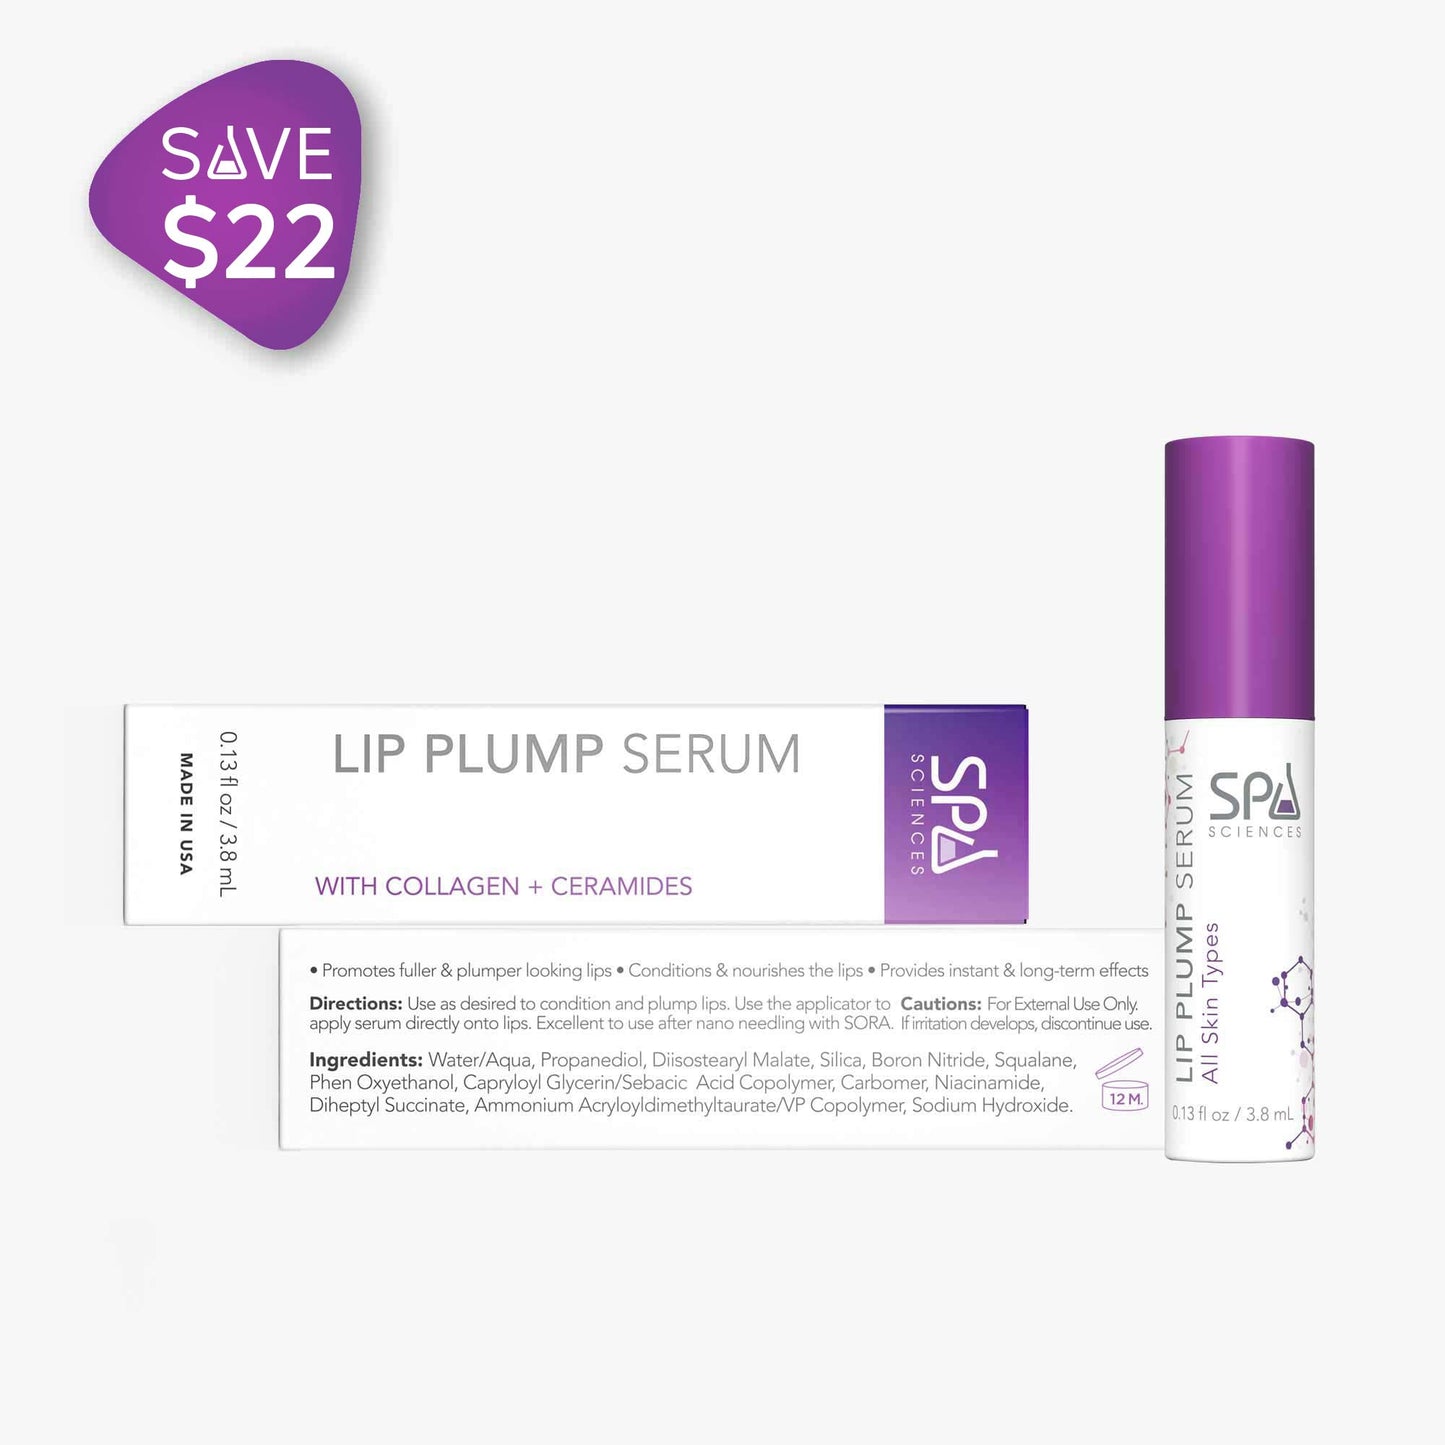 On the Go Set Lip Plump Serum by Spa Sciences.